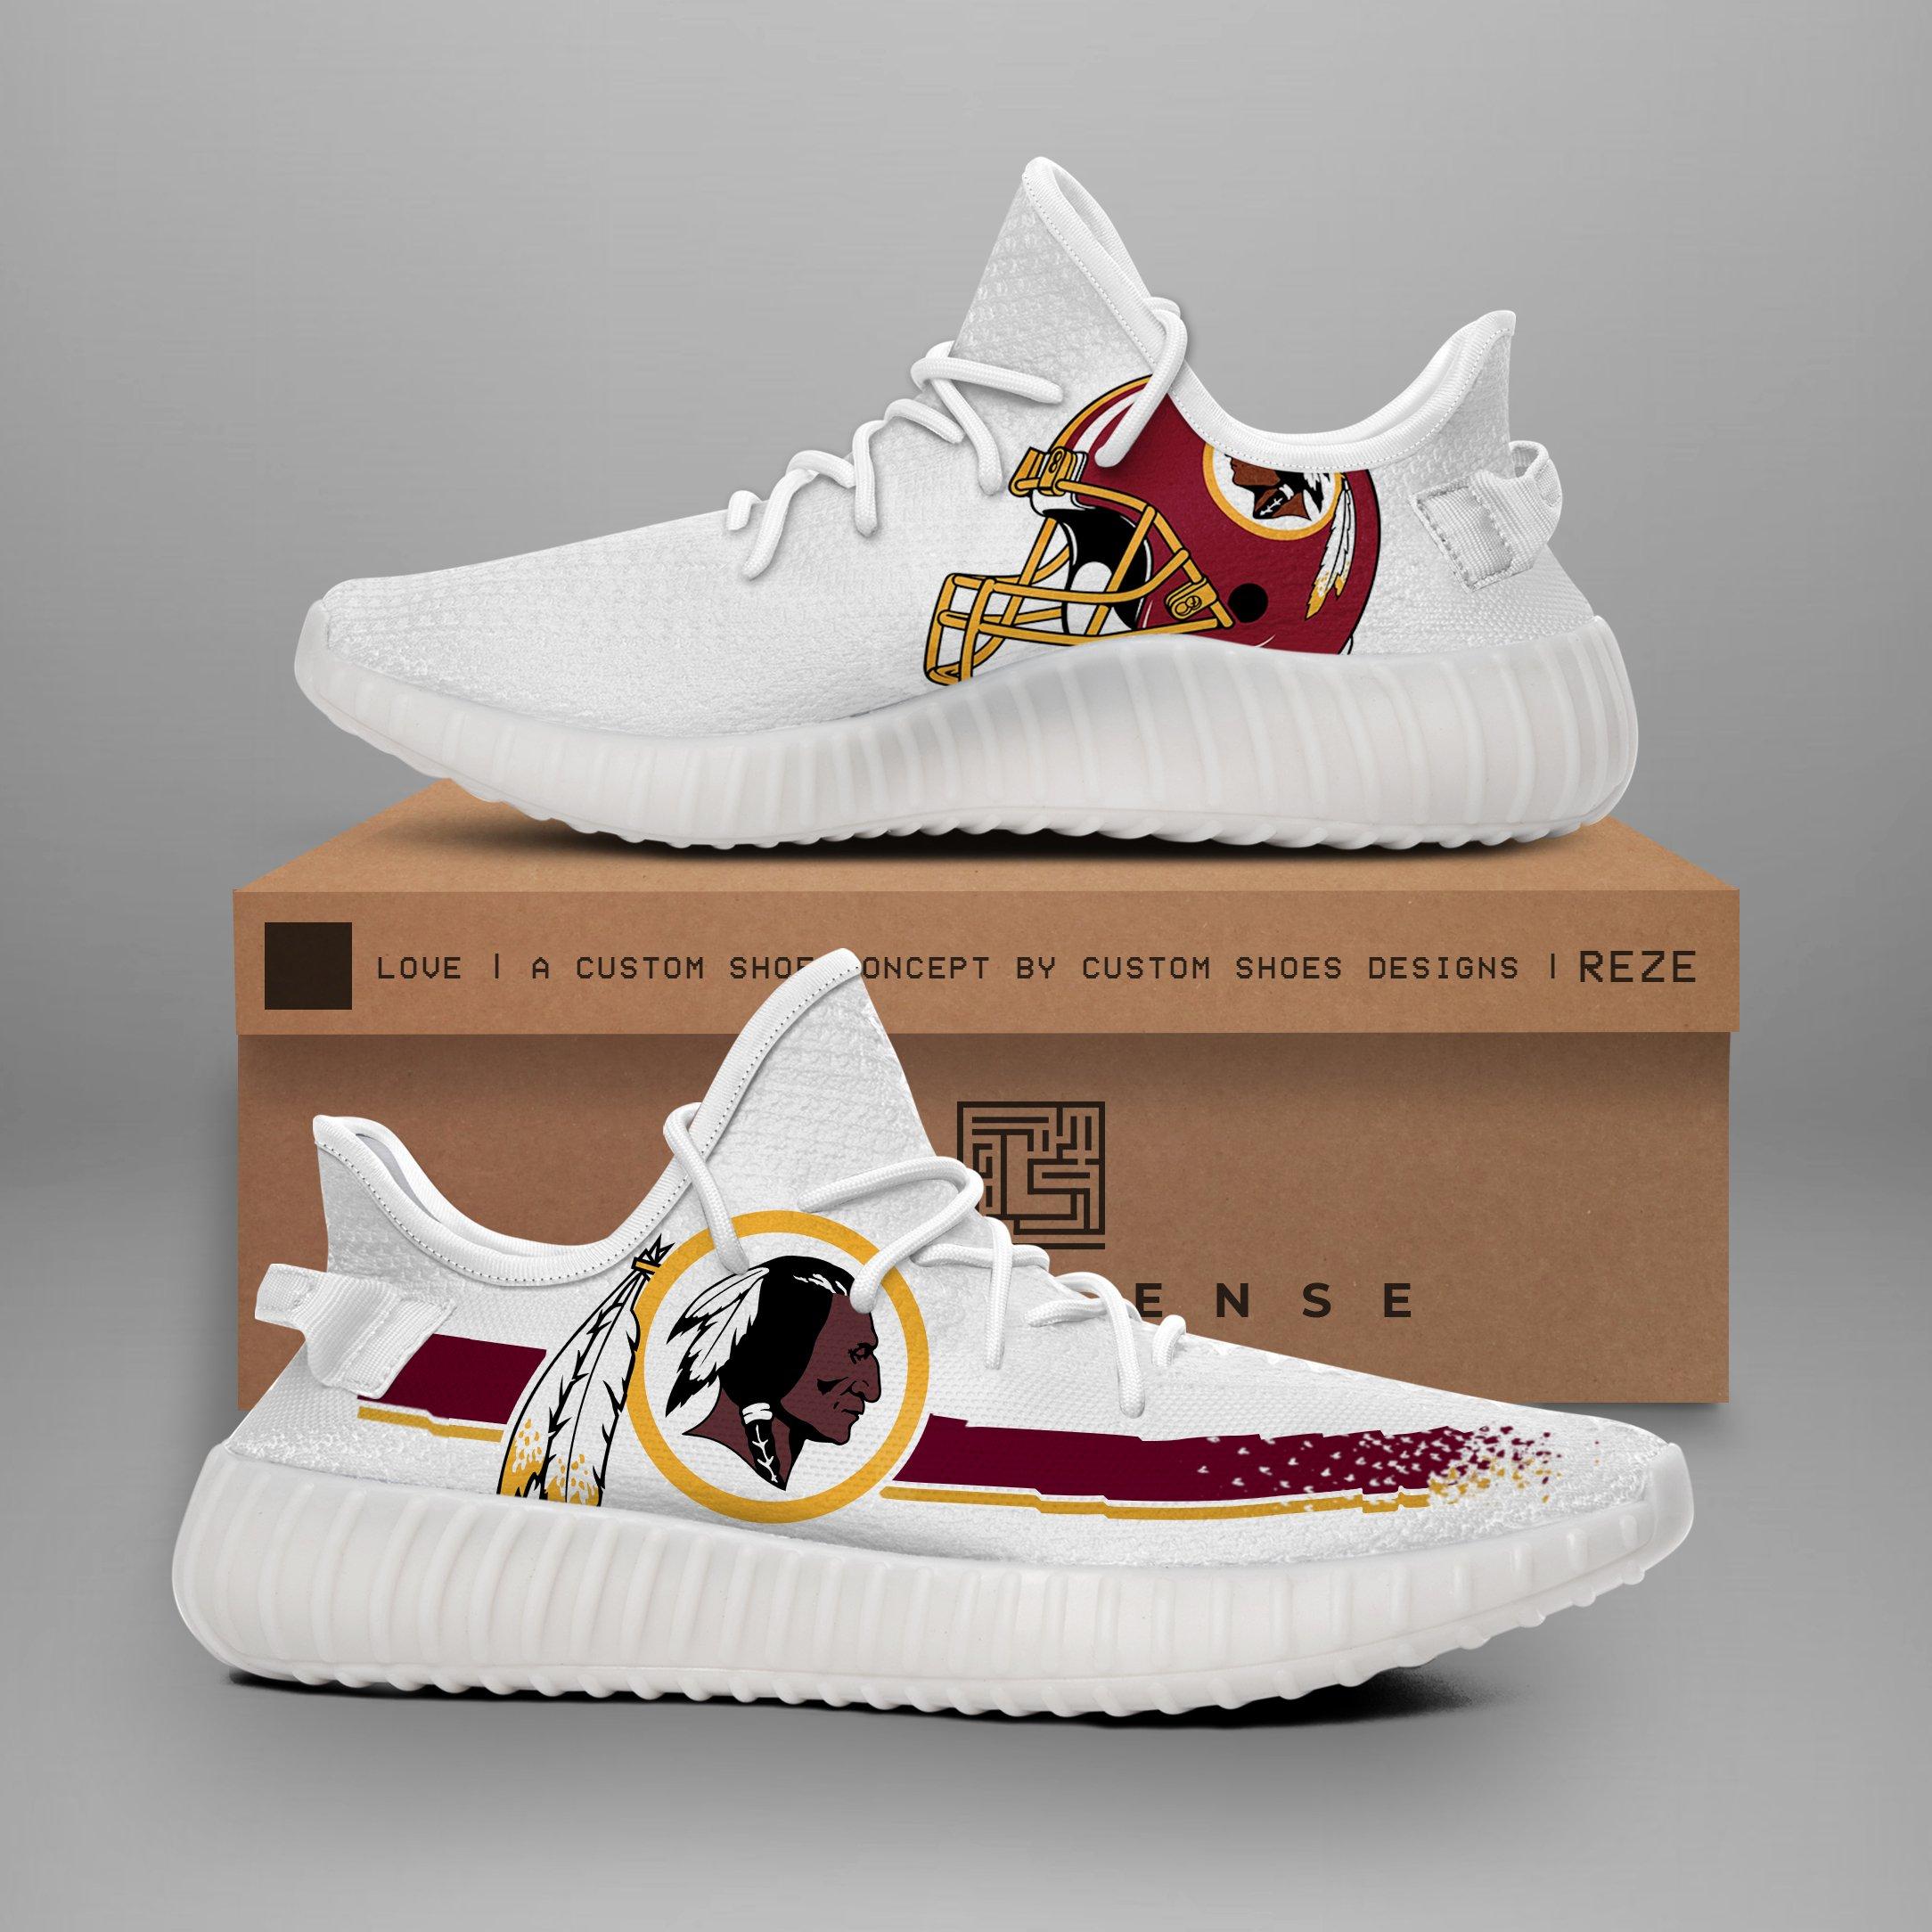 redskins sneakers for sale